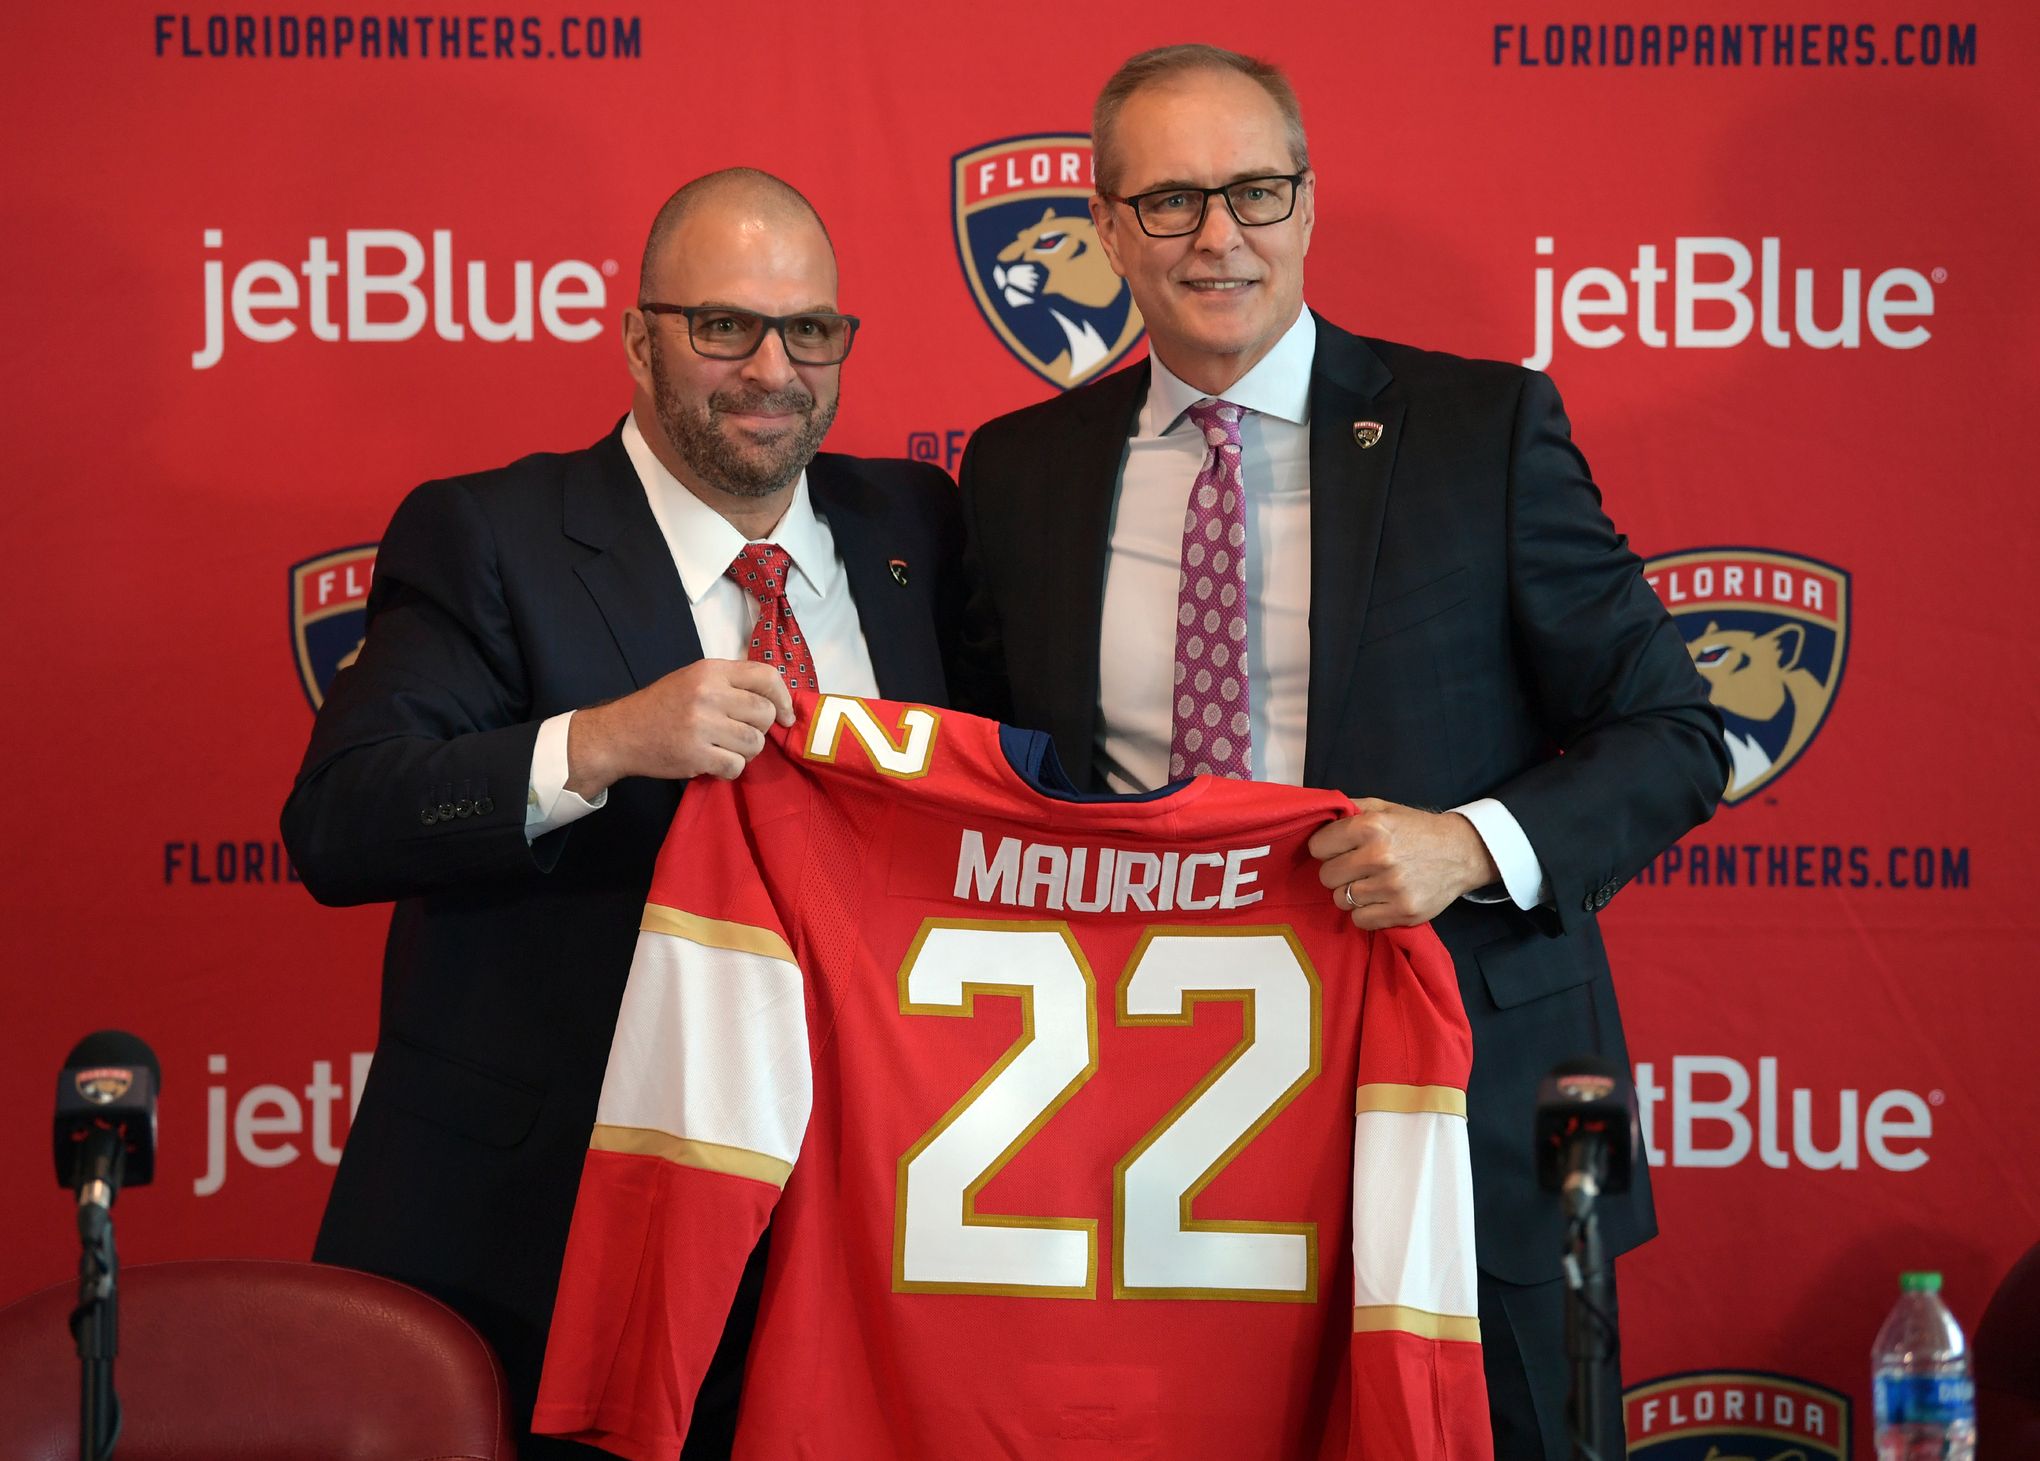 For Panthers coach Paul Maurice, this Florida run is no everyday